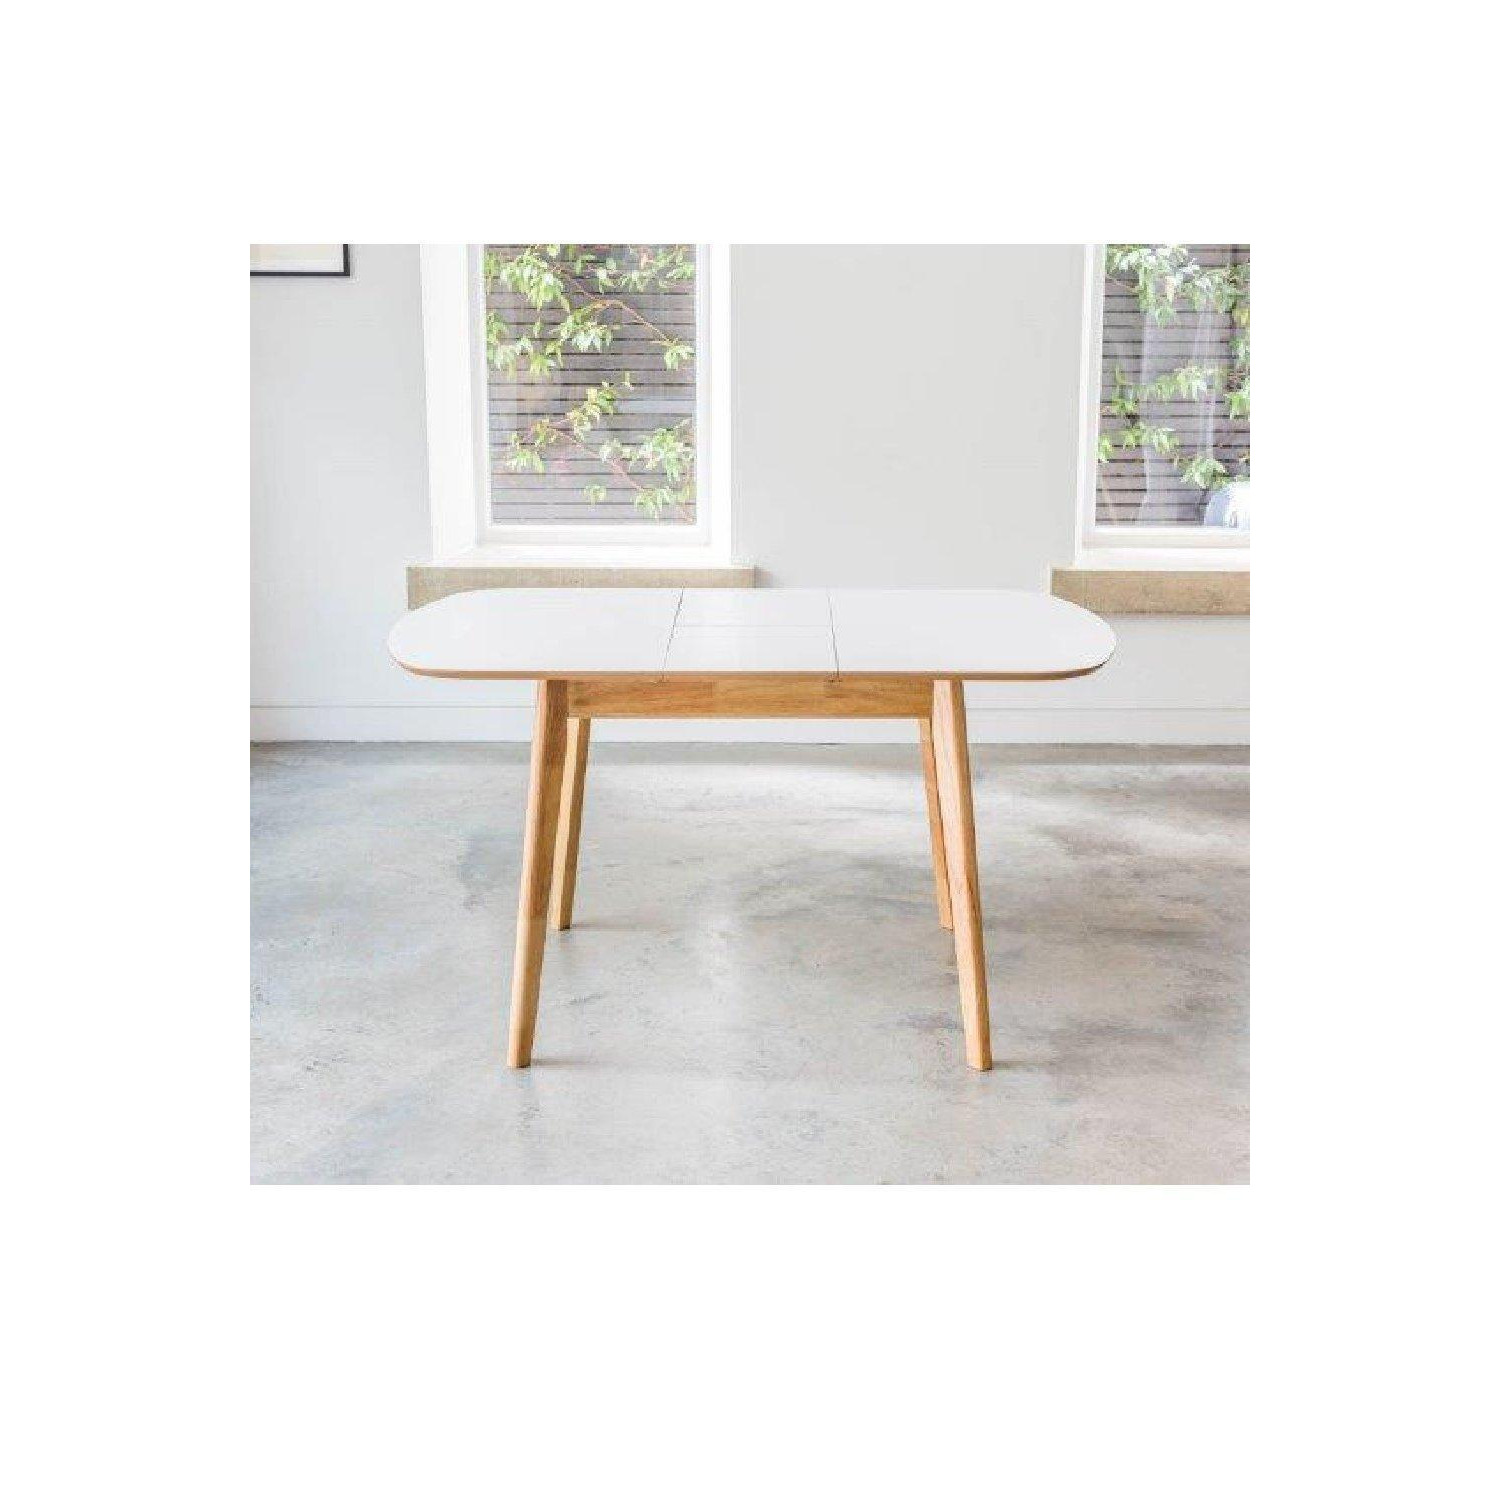 Abbey - Extending Indoor Dining Table - 106-136cm - image 1